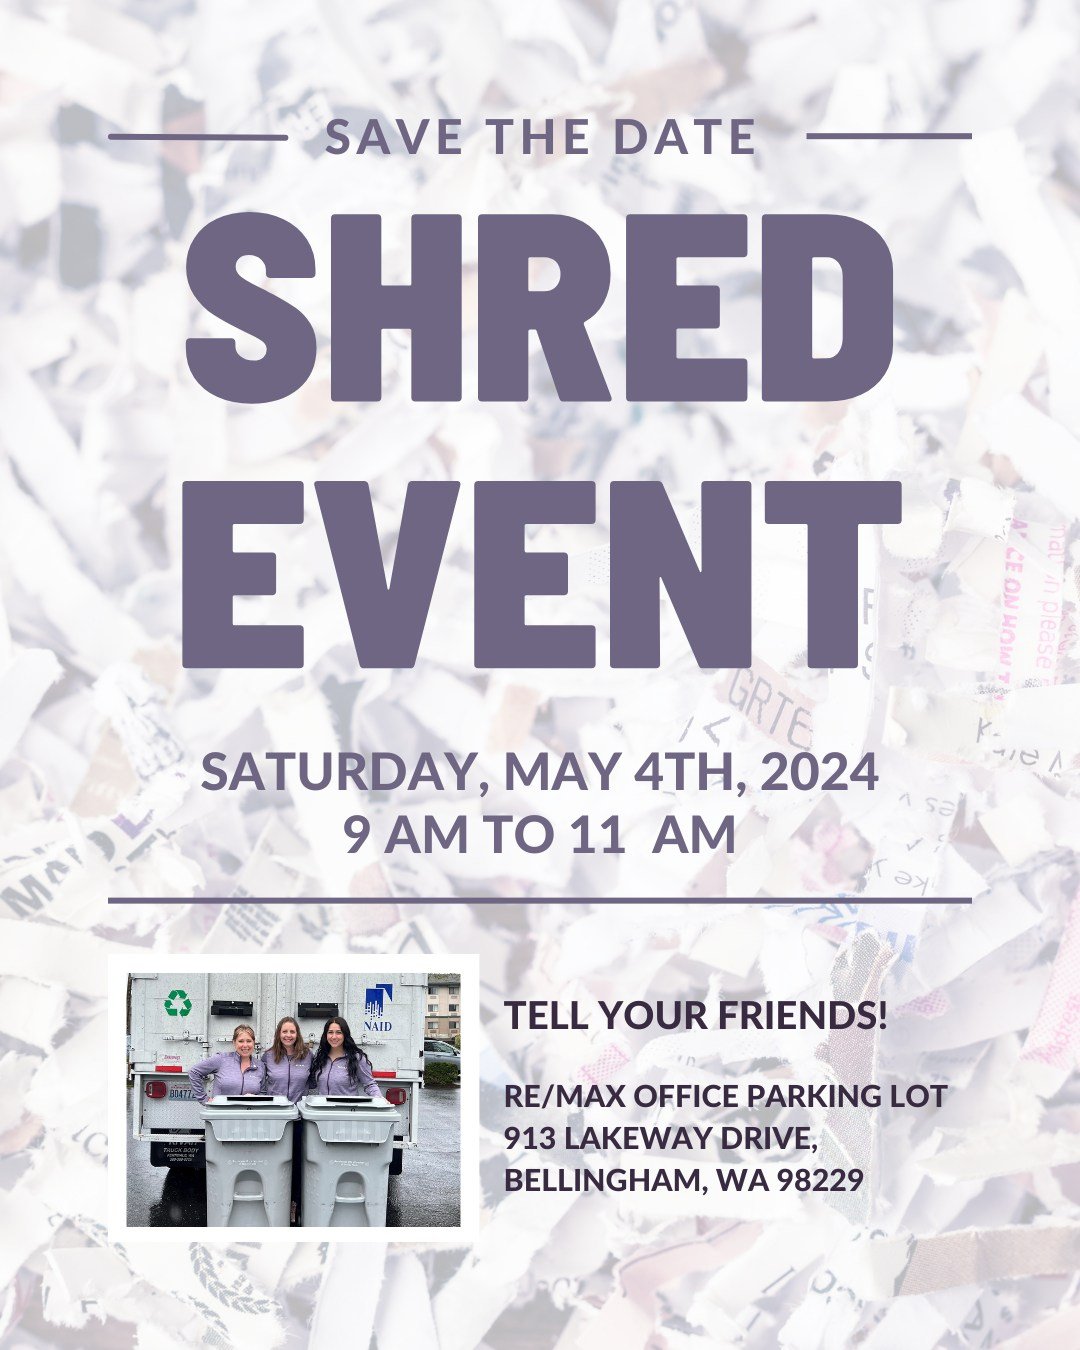 Mark your calendars! With tax season coming to a close, A-1 Shredding is coming to our Lakeway Office (913 Lakeway Drive) to take care of YOU and your family/friends' shredding needs. 📃

On Saturday, May 4th from 9 AM to 11 AM, we will be in the par